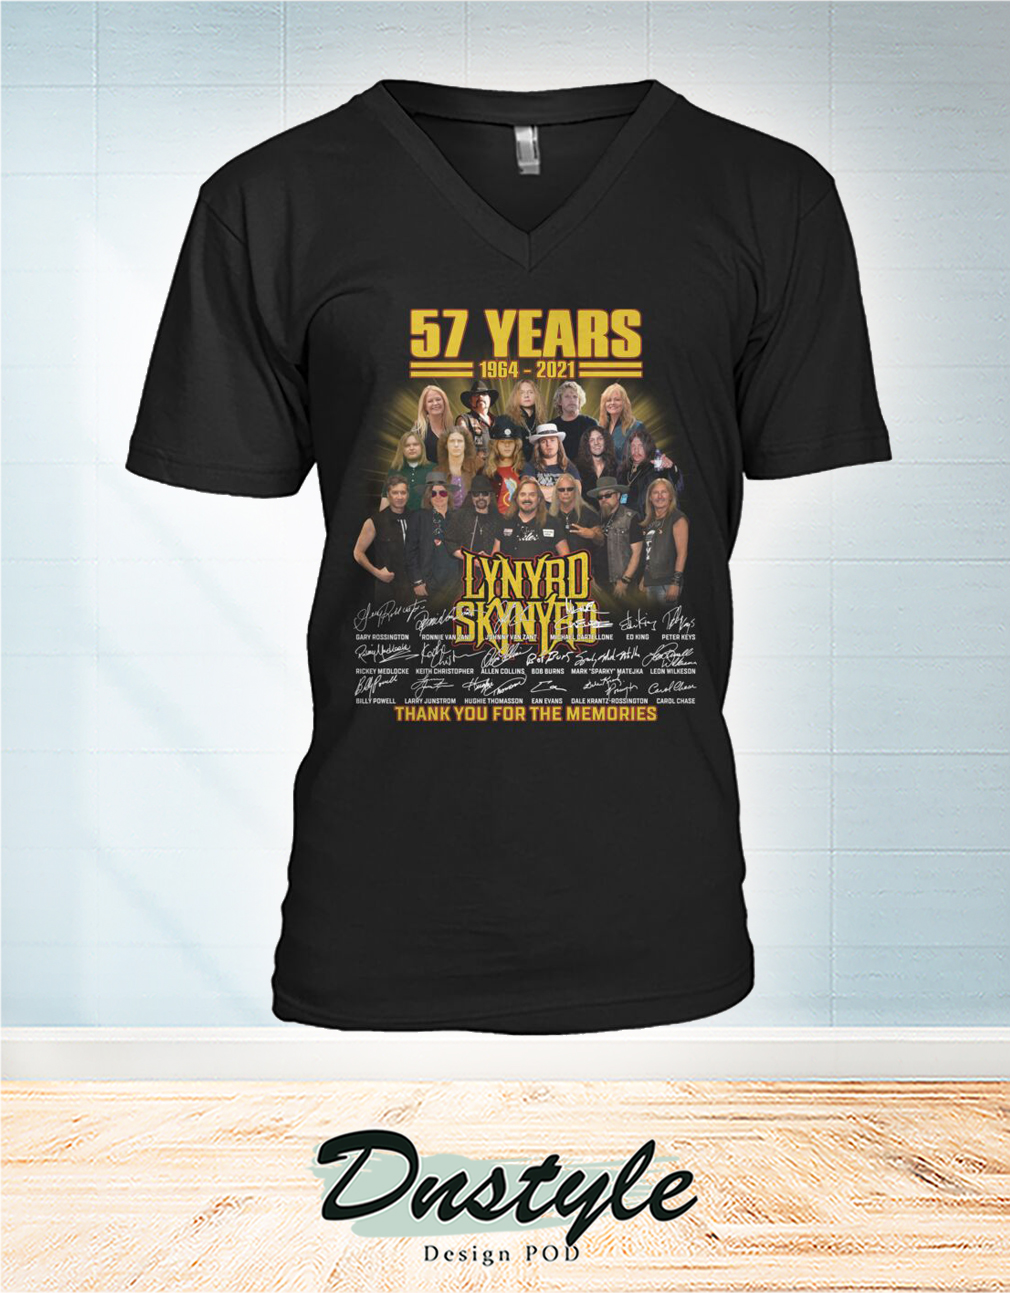 Lynyrd Skynyrd 57 years signature thank you for the memories shirt